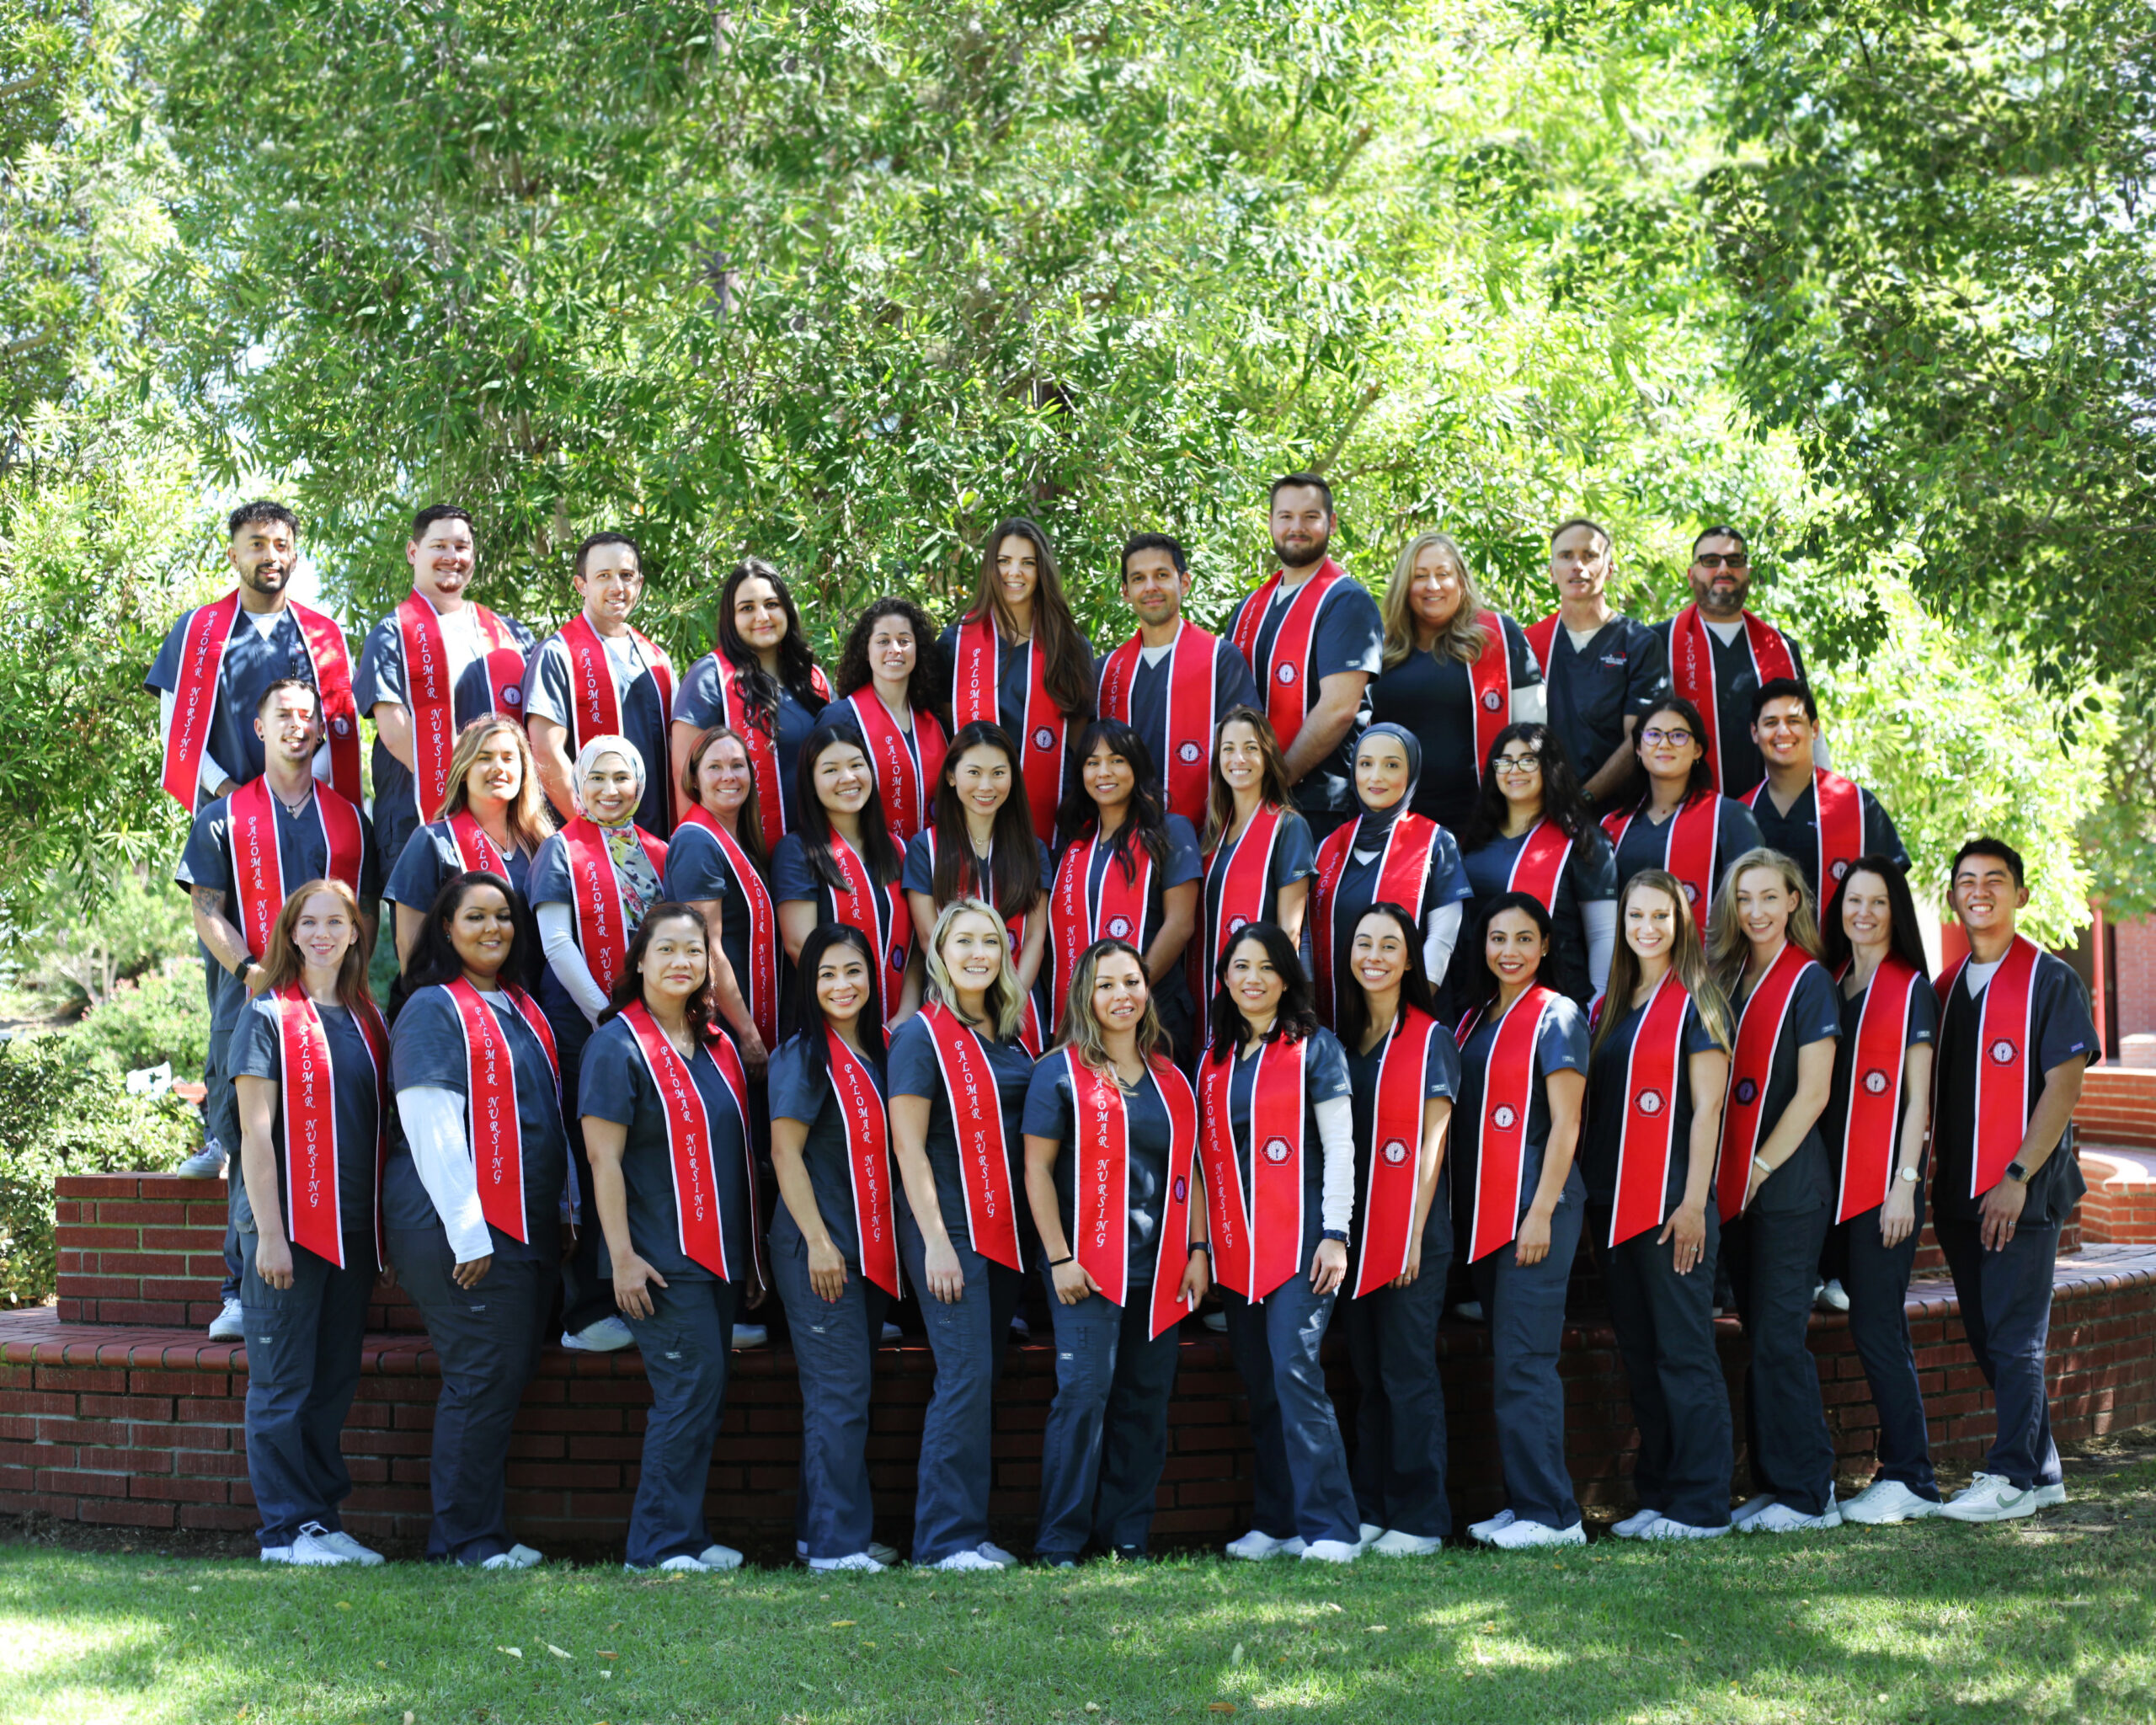 group photo of nursing students wearing scrubs and graduation stoles